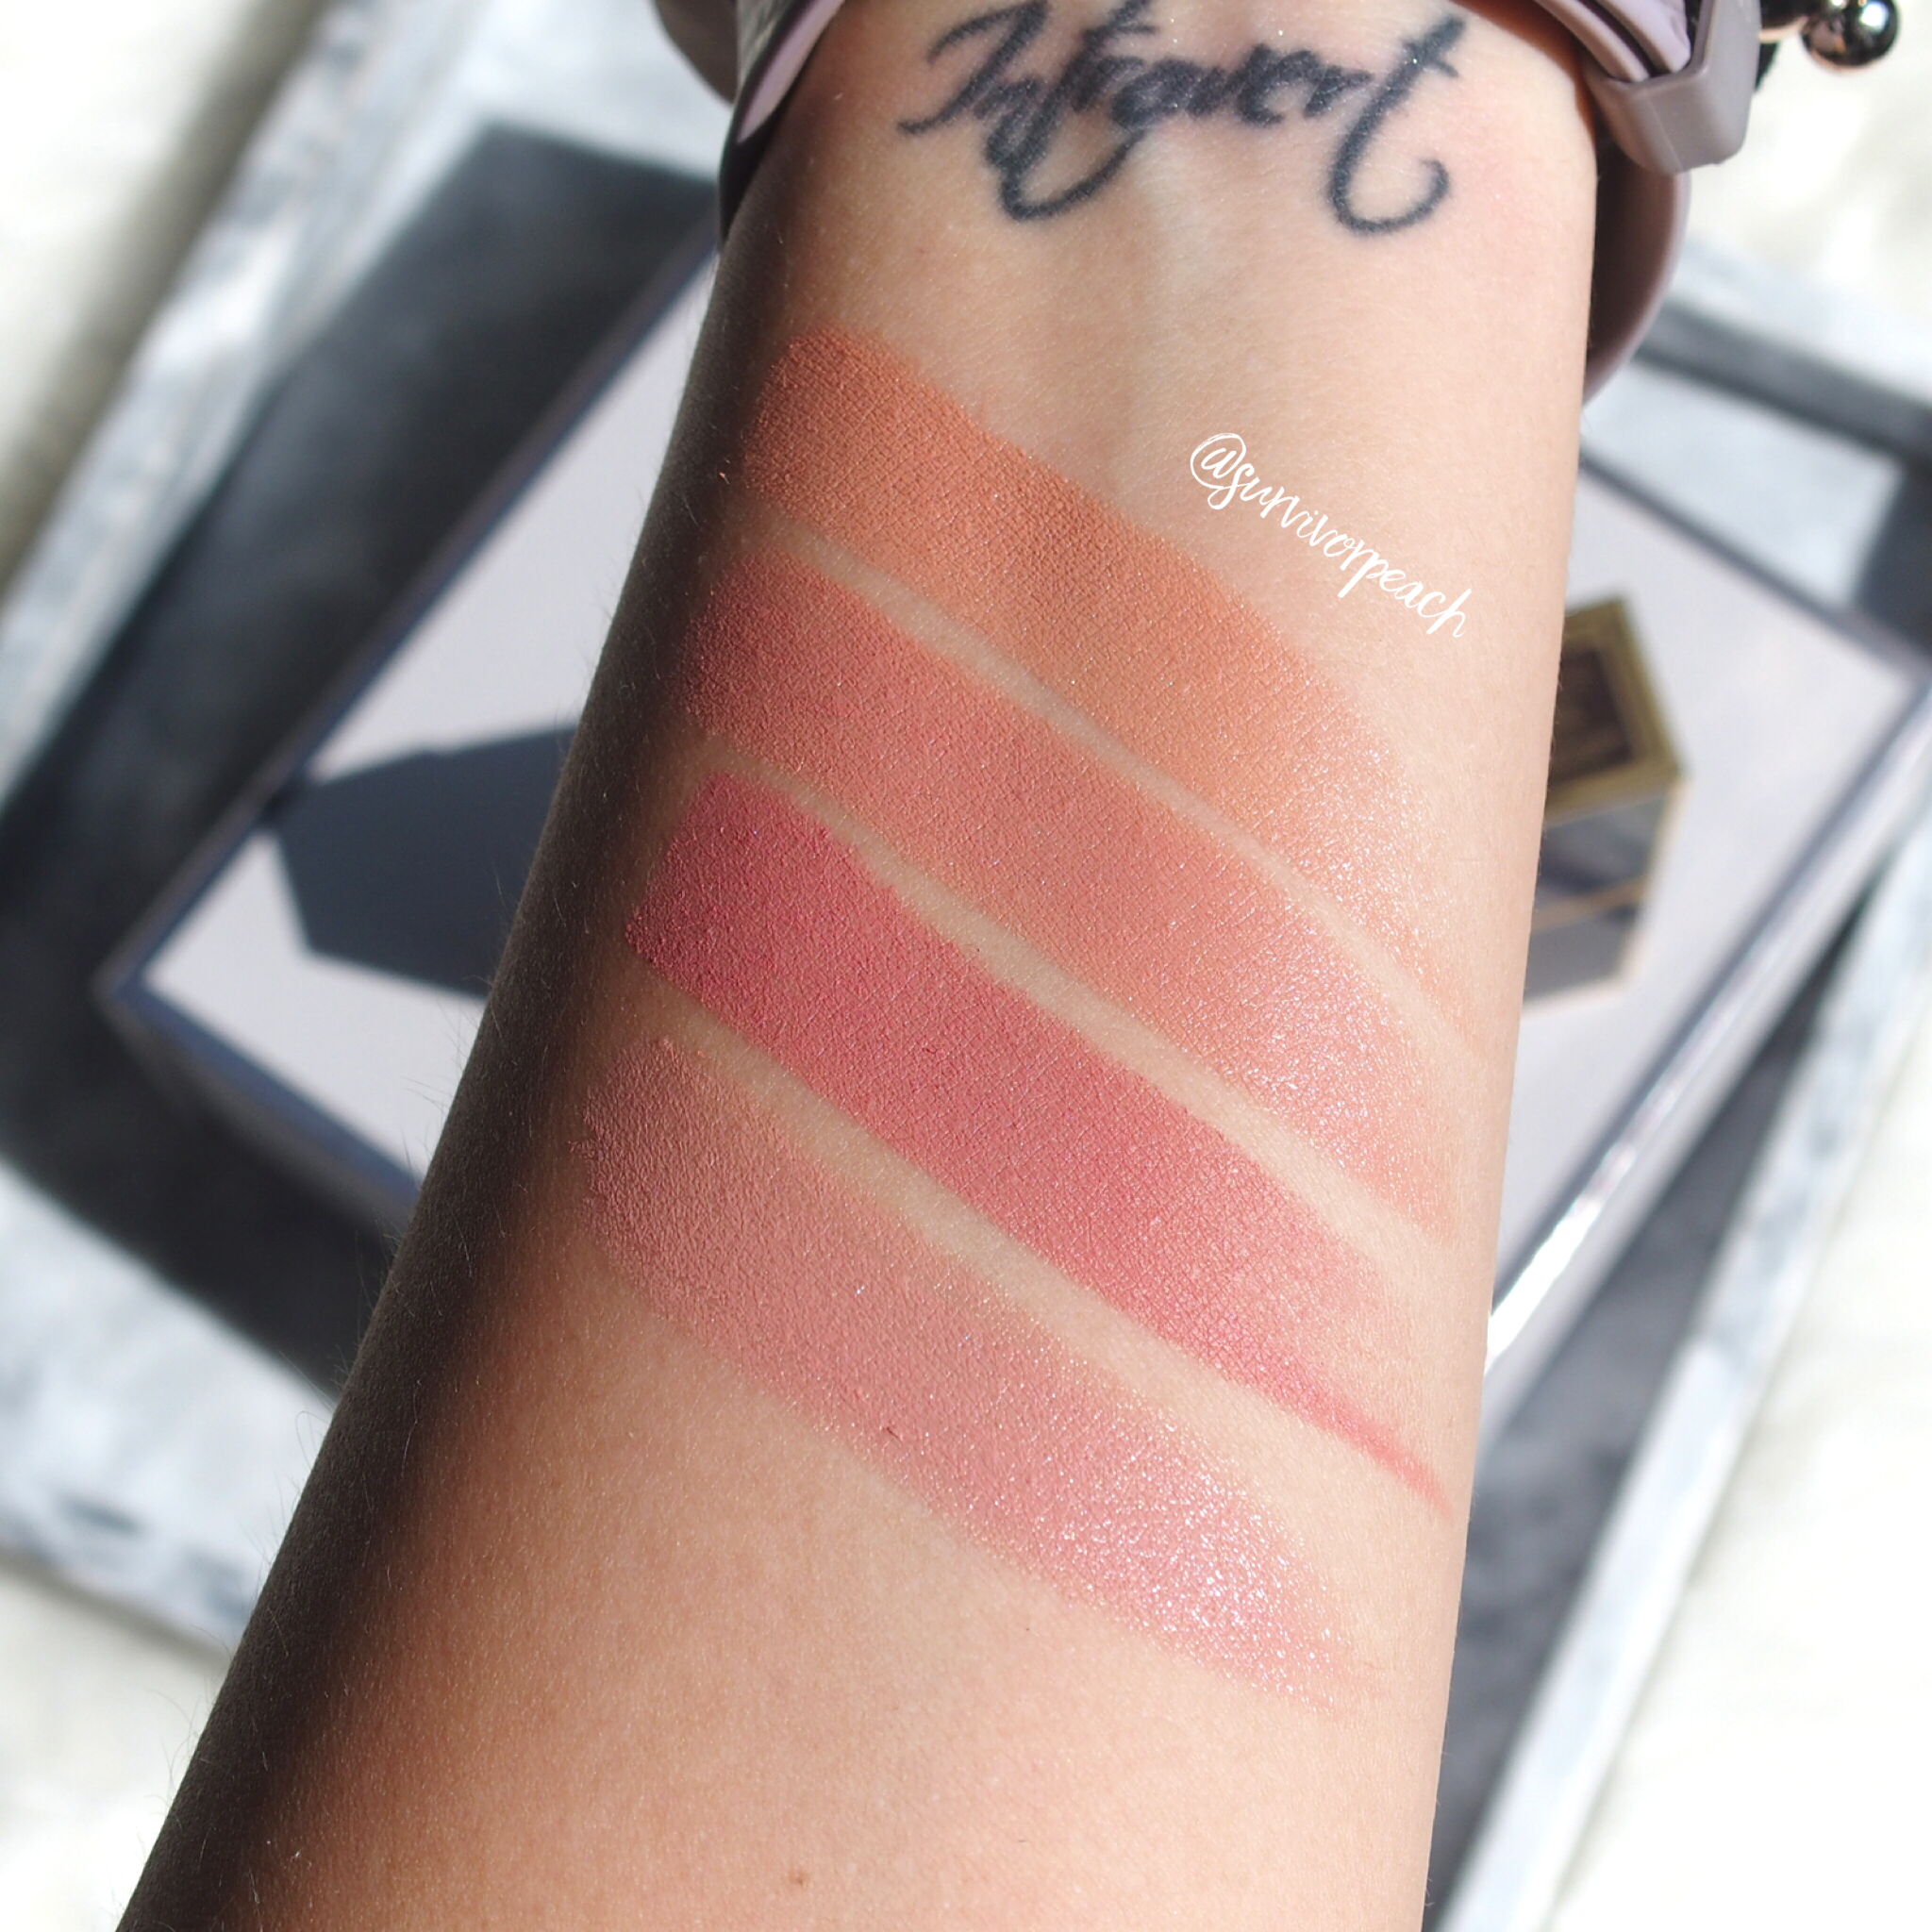 Swatches of all my Tom Ford Lipsticks: Creams, Mattes, Girls and Boys —  Survivorpeach